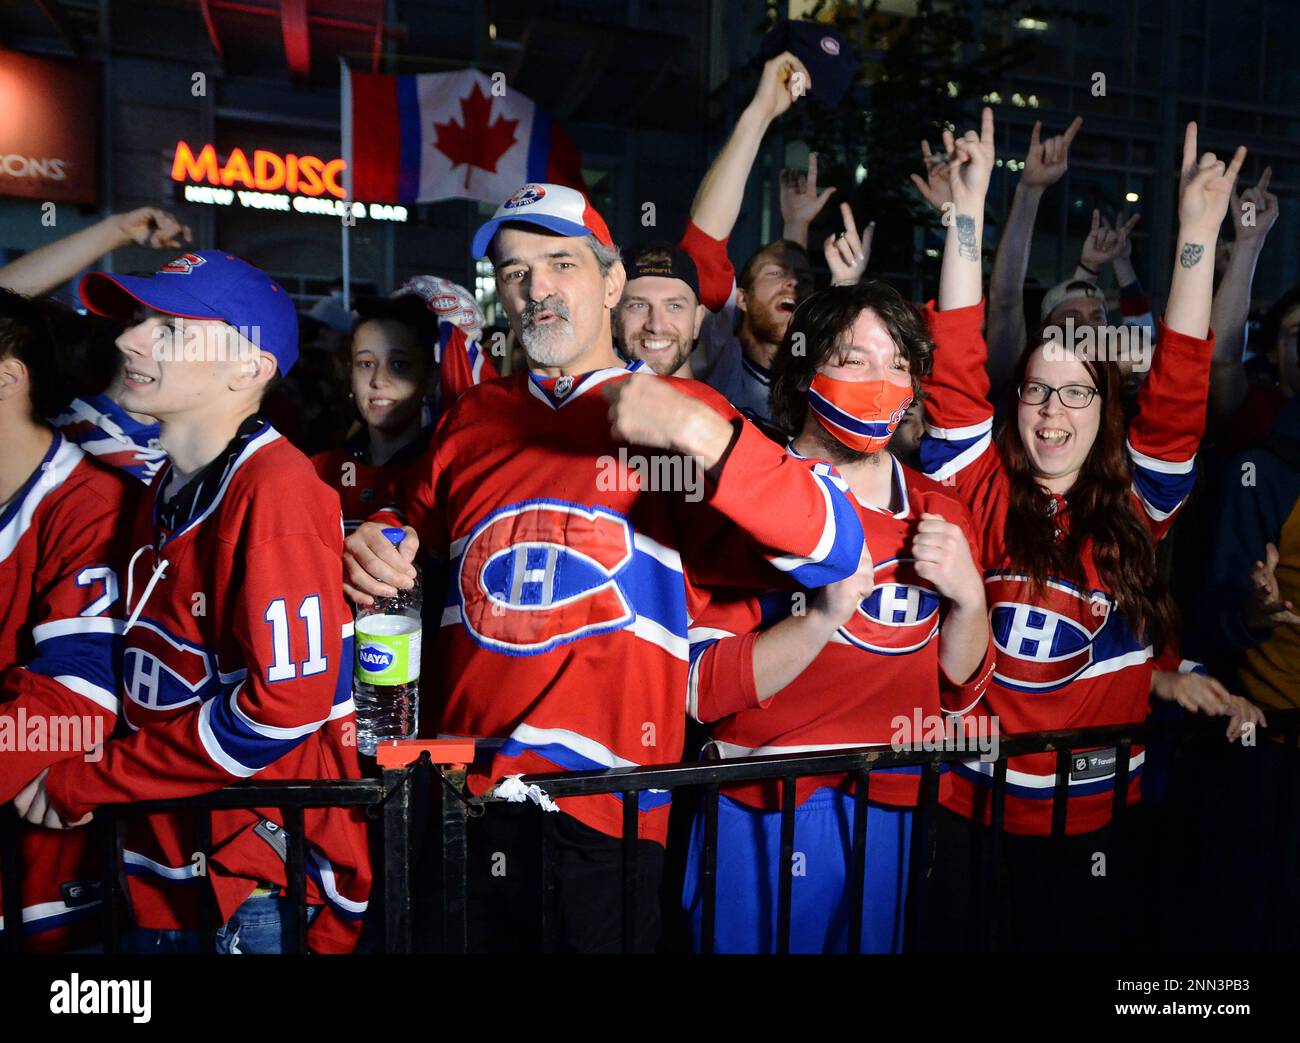 Two Nordiques fans, Gabriel Beaurivage, left, and Henri Richard Godin,  gather with others outside the Pepsi Colisee as approximately 15,000 people  bought tickets to watch the NHL hockey game between the Montreal